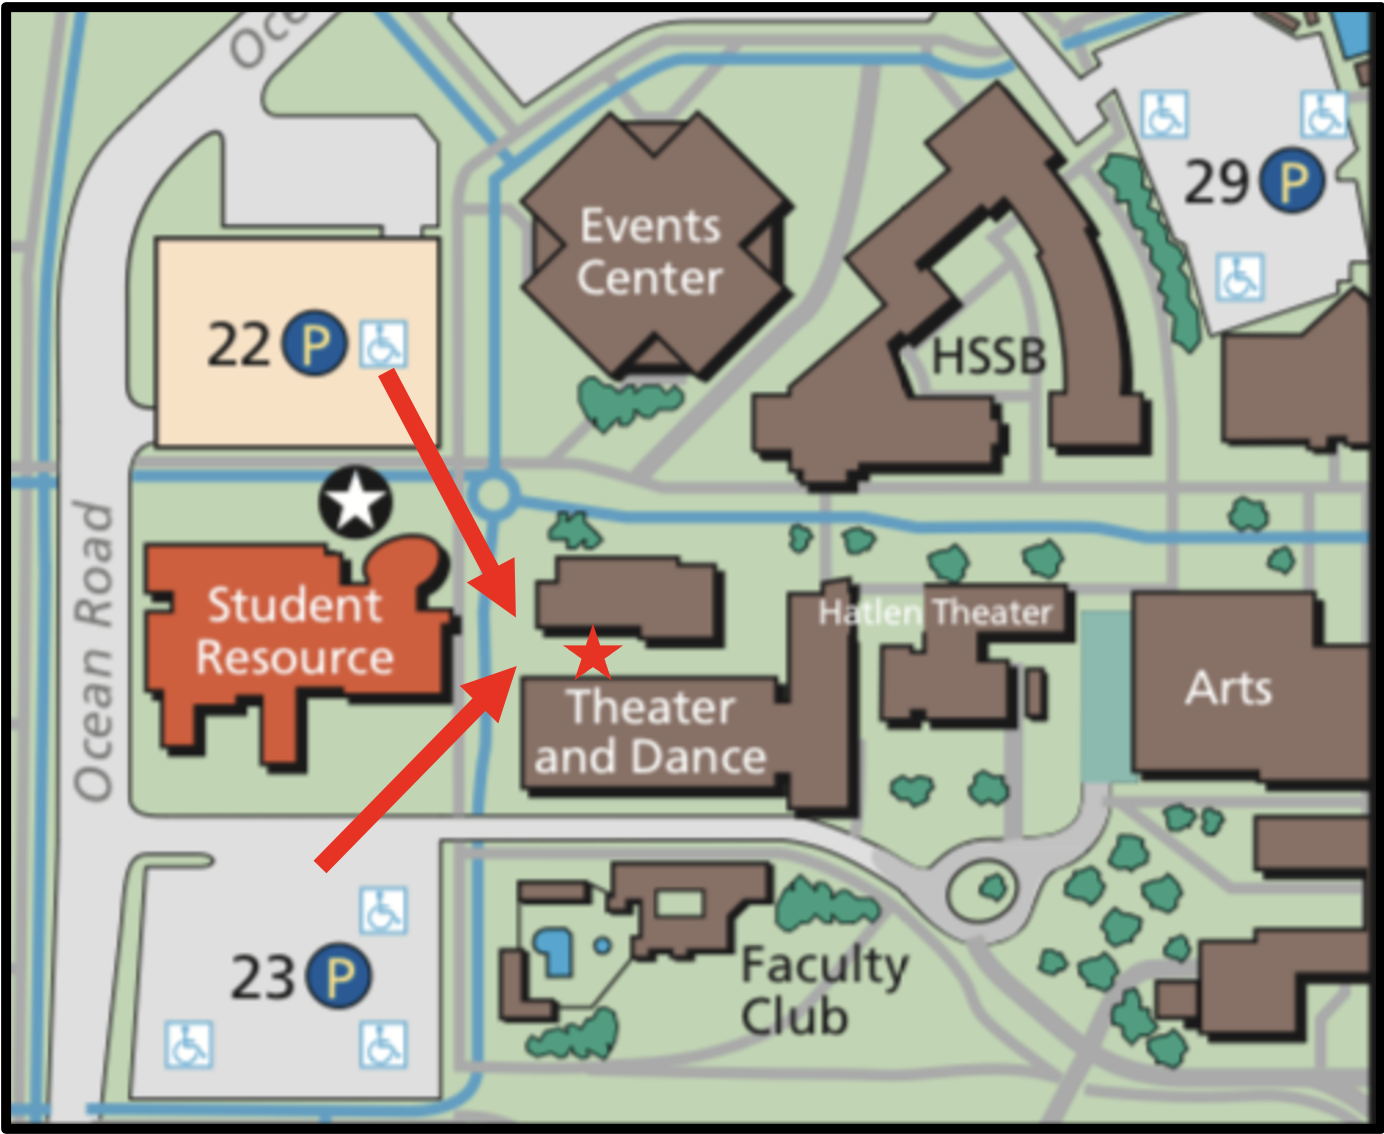 map of Theater Dance area on campus